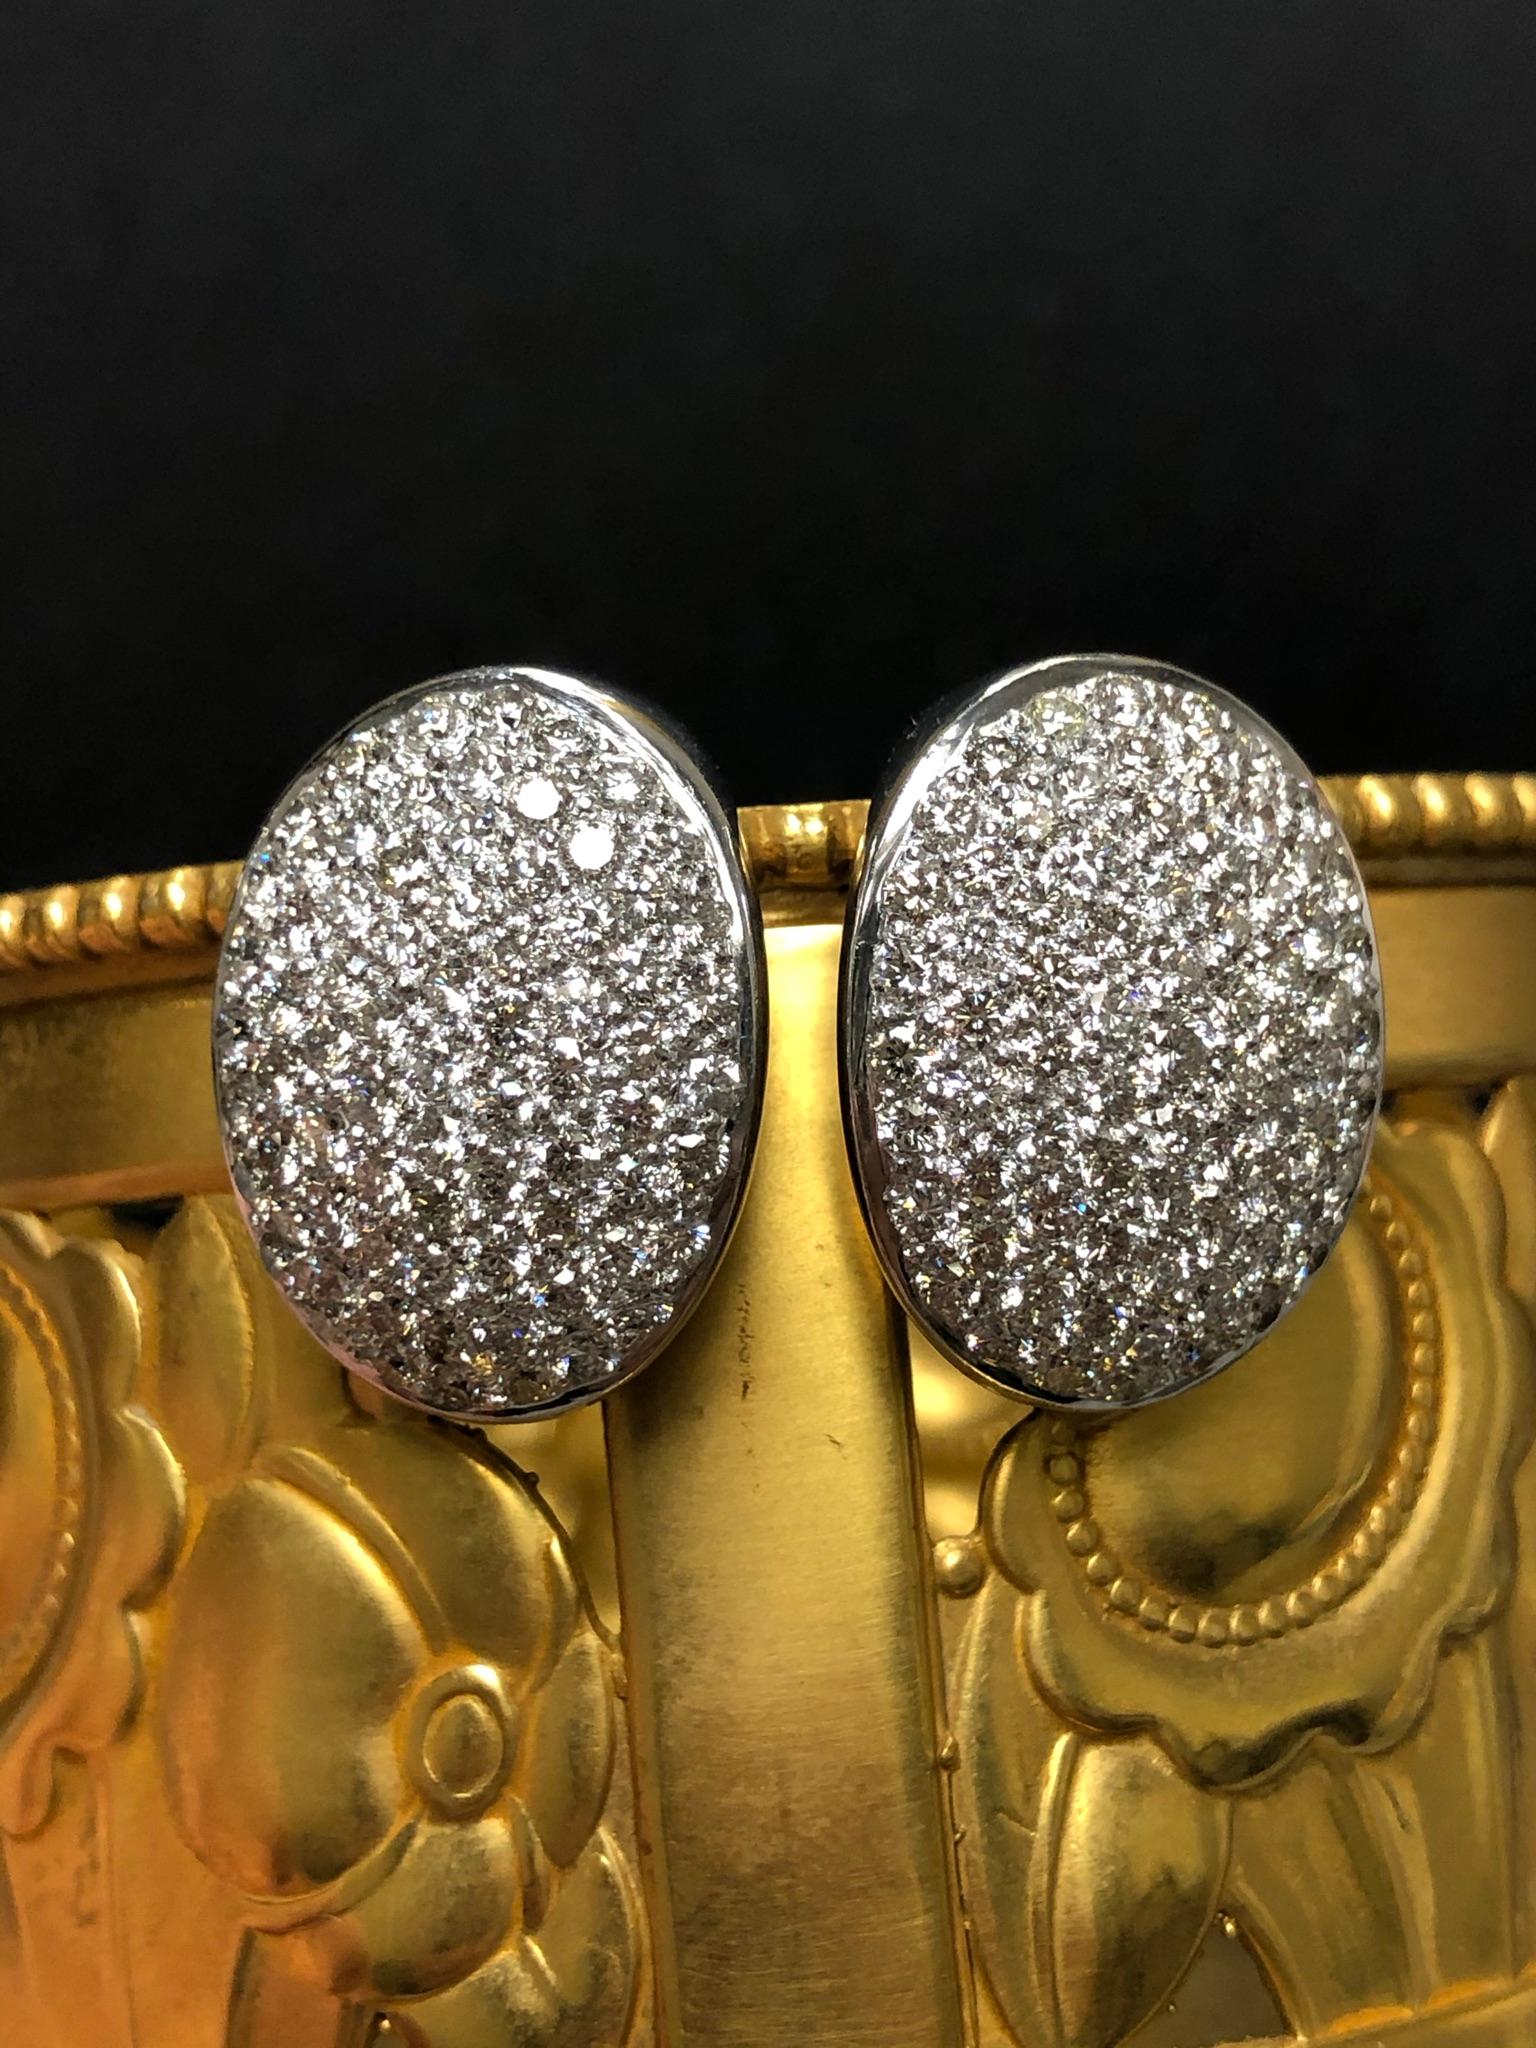 A fabulously well made pair of pave diamond earrings done in 18K white gold set with approximately 5cttw in G-I color Vs1-2 clarity round diamonds. They have posts with omega backs. These earrings put on quite the show!

Dimensions/Weight:
They